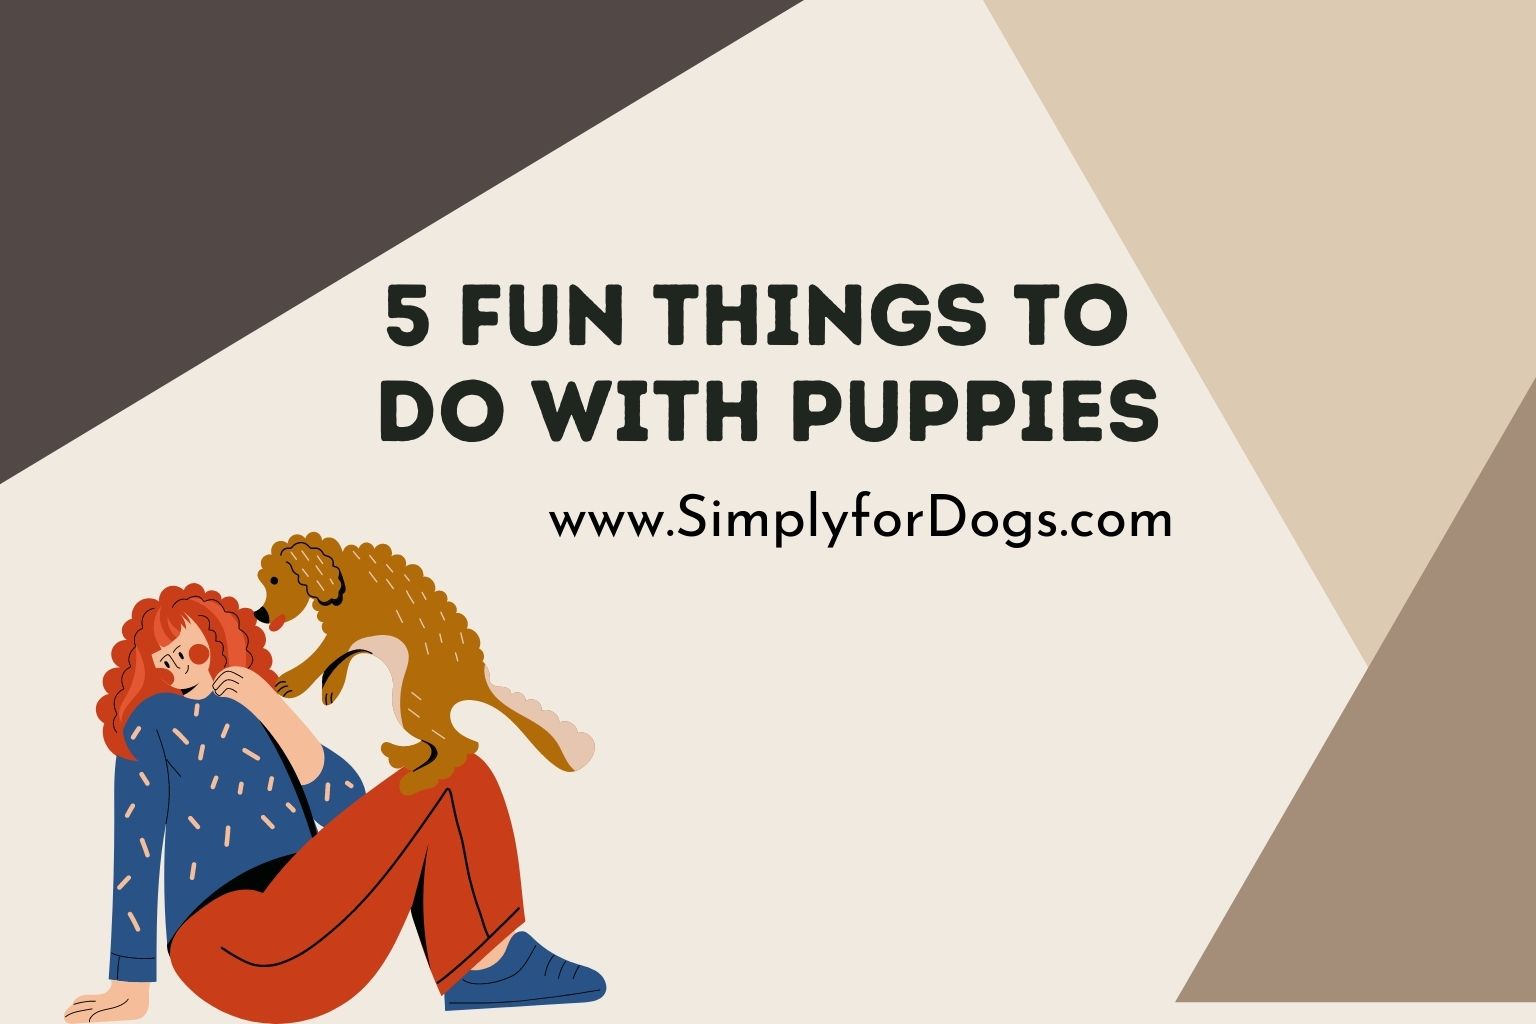 5 Fun Things to Do with Puppies